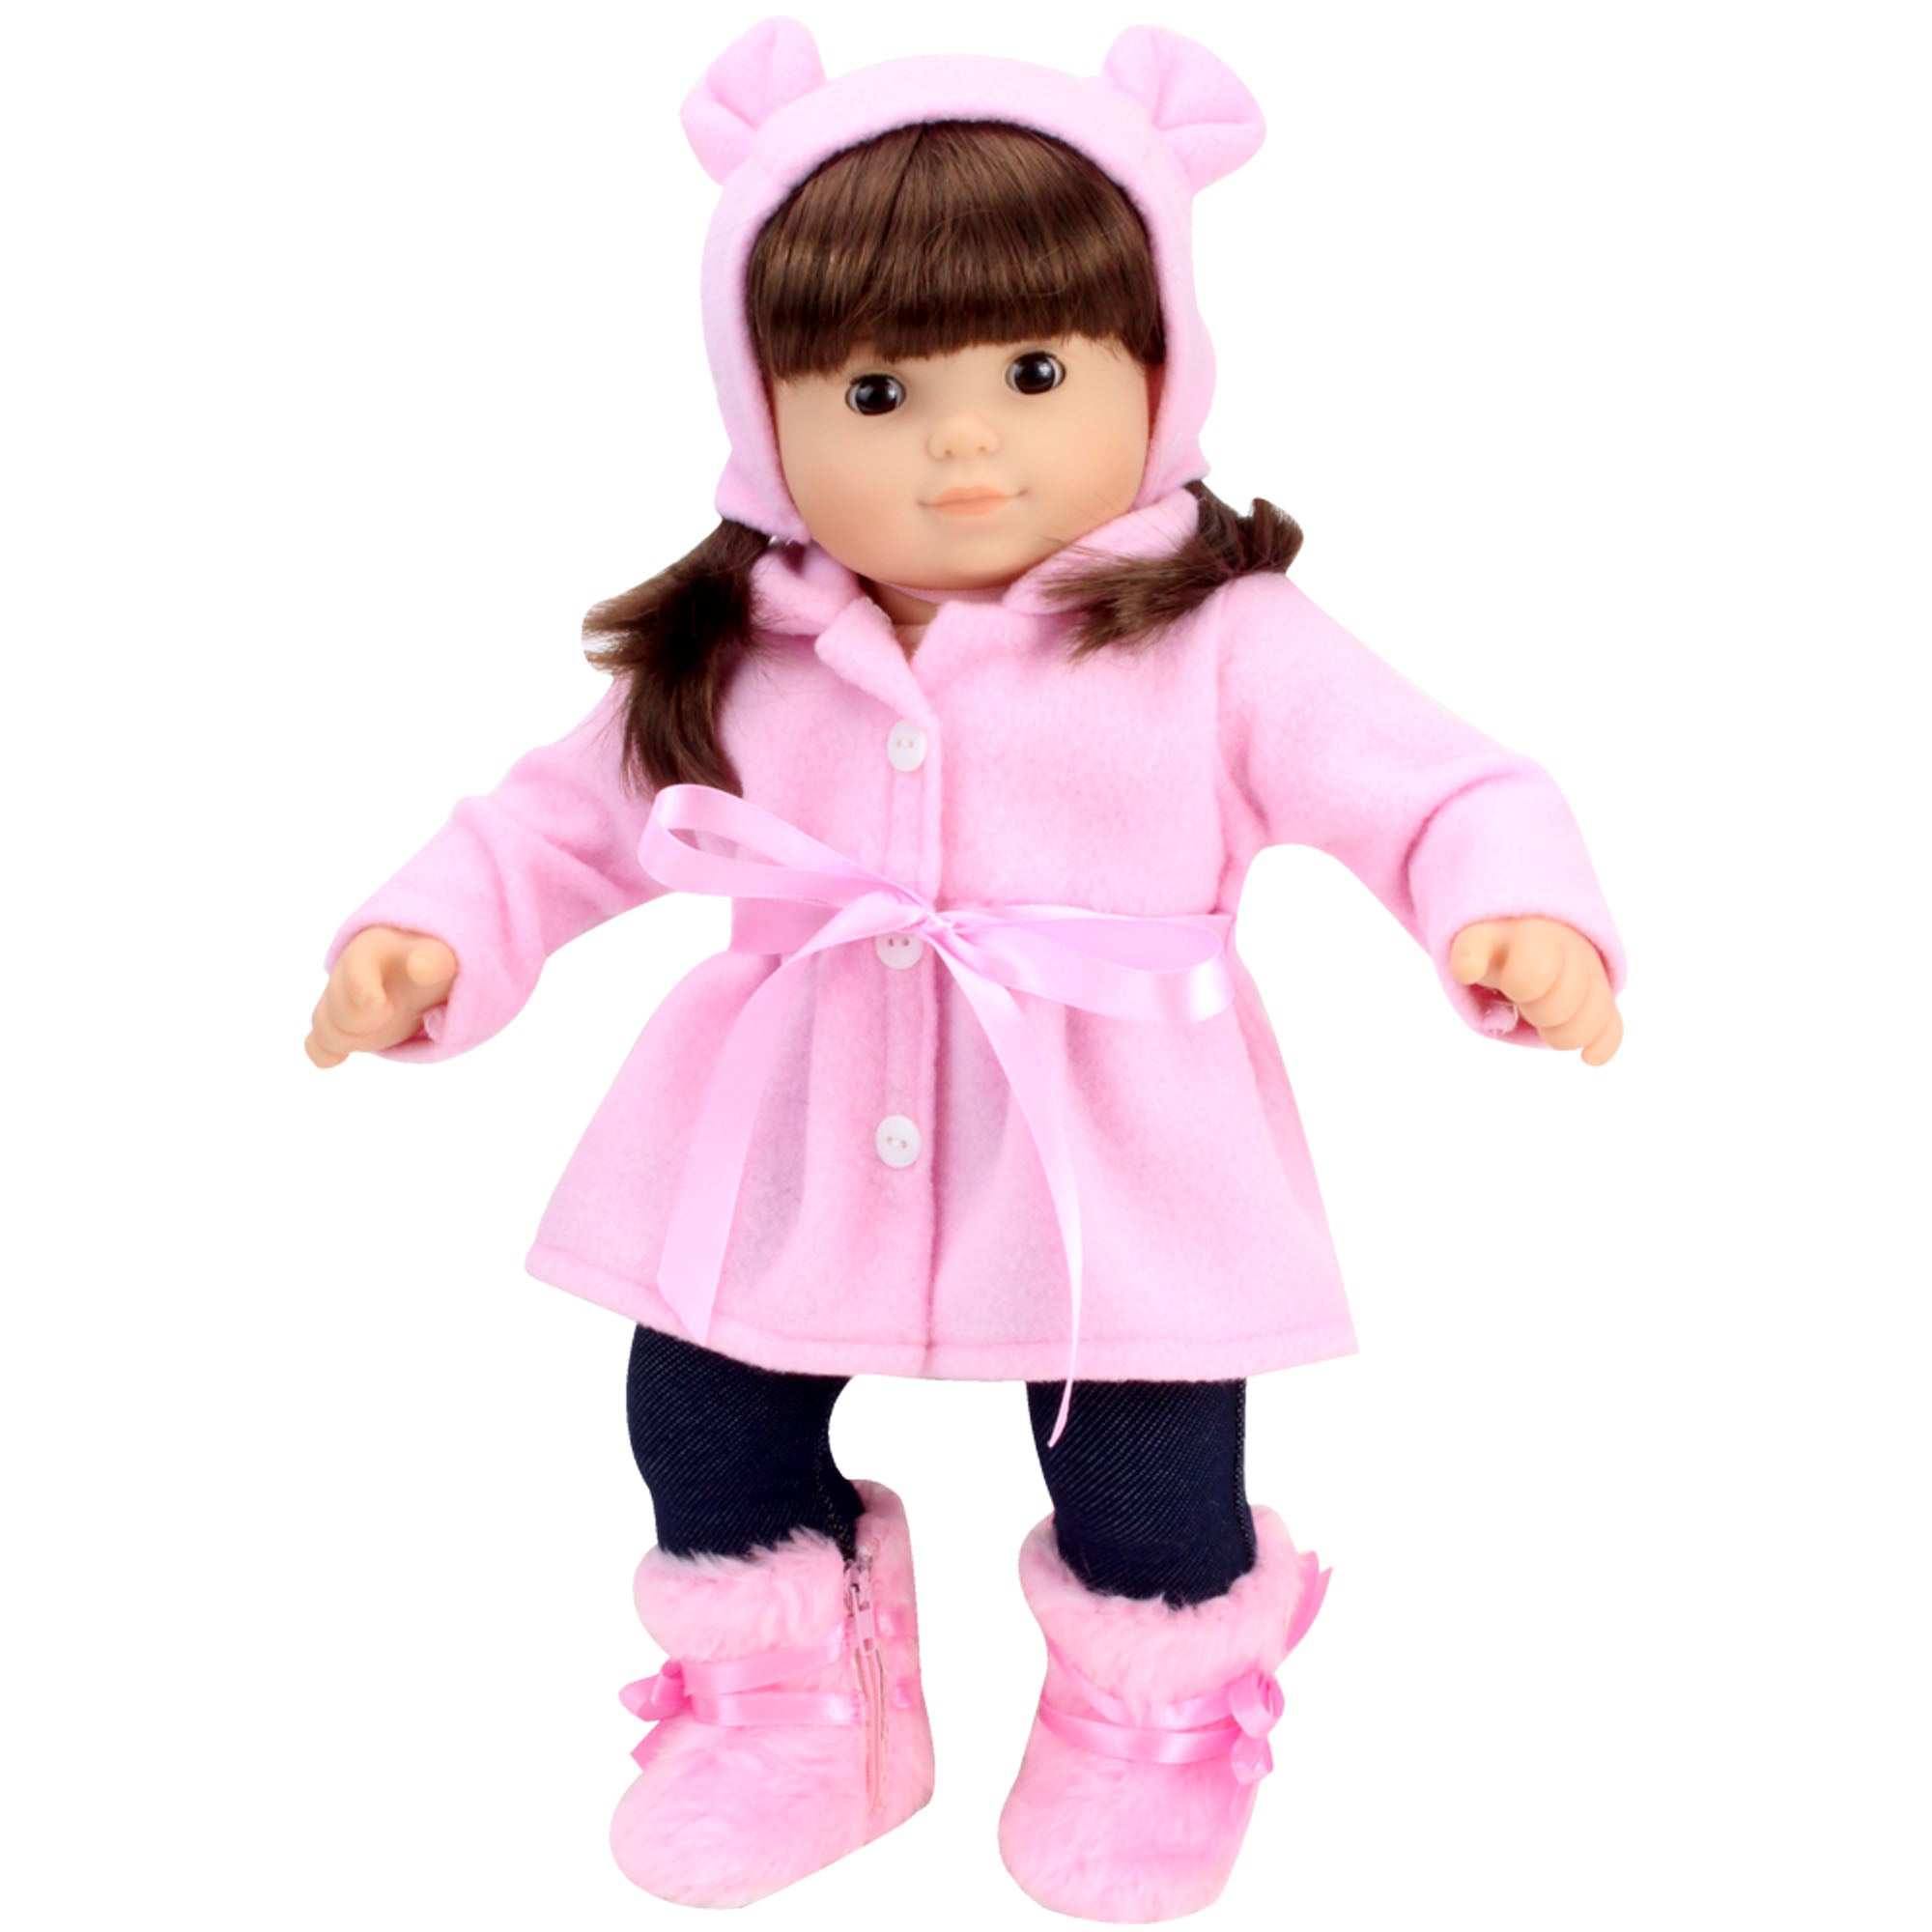 Sophia's Winter Coat, Hat and Boots Set for 15'' Dolls, Light Pink